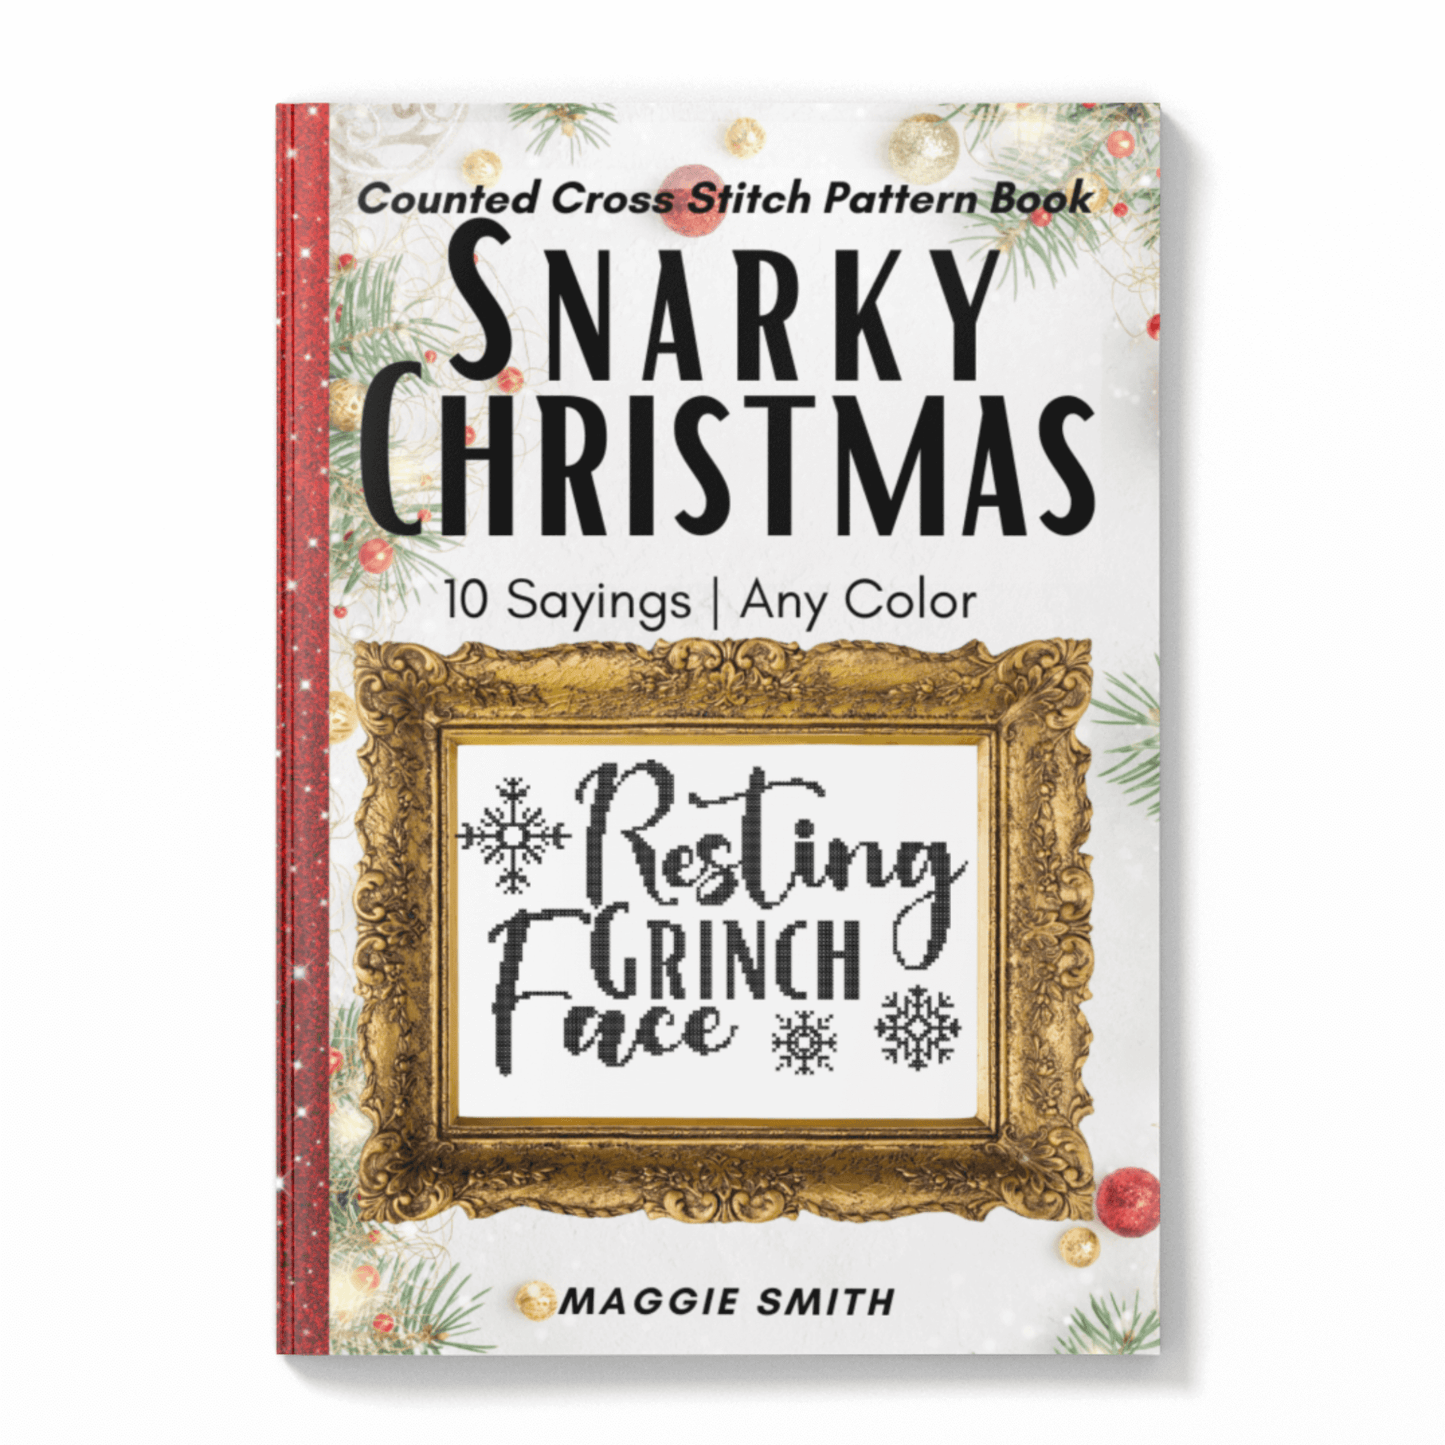 Snarky Crristmas Sayings Counted Cross Stitch Pattern Book